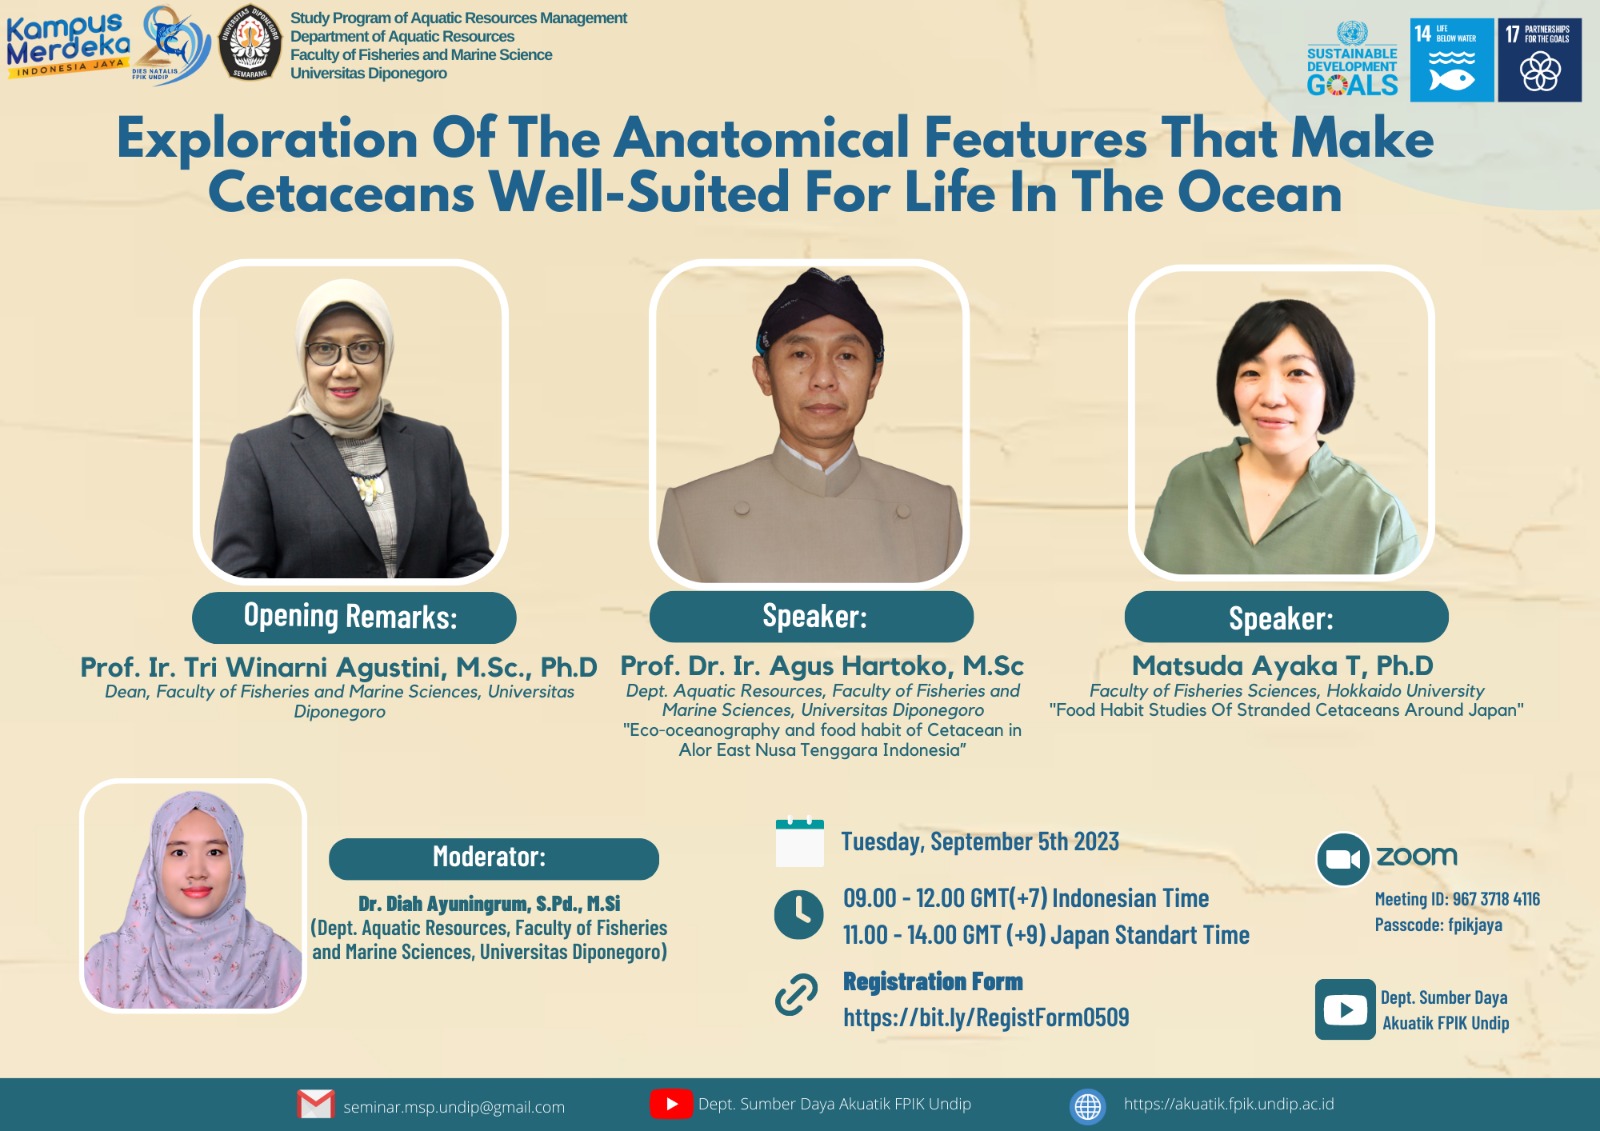 International Seminar “Exploration Of The Anatomical Features That Make Cetaceans Well-Suited For Life In The Ocean”